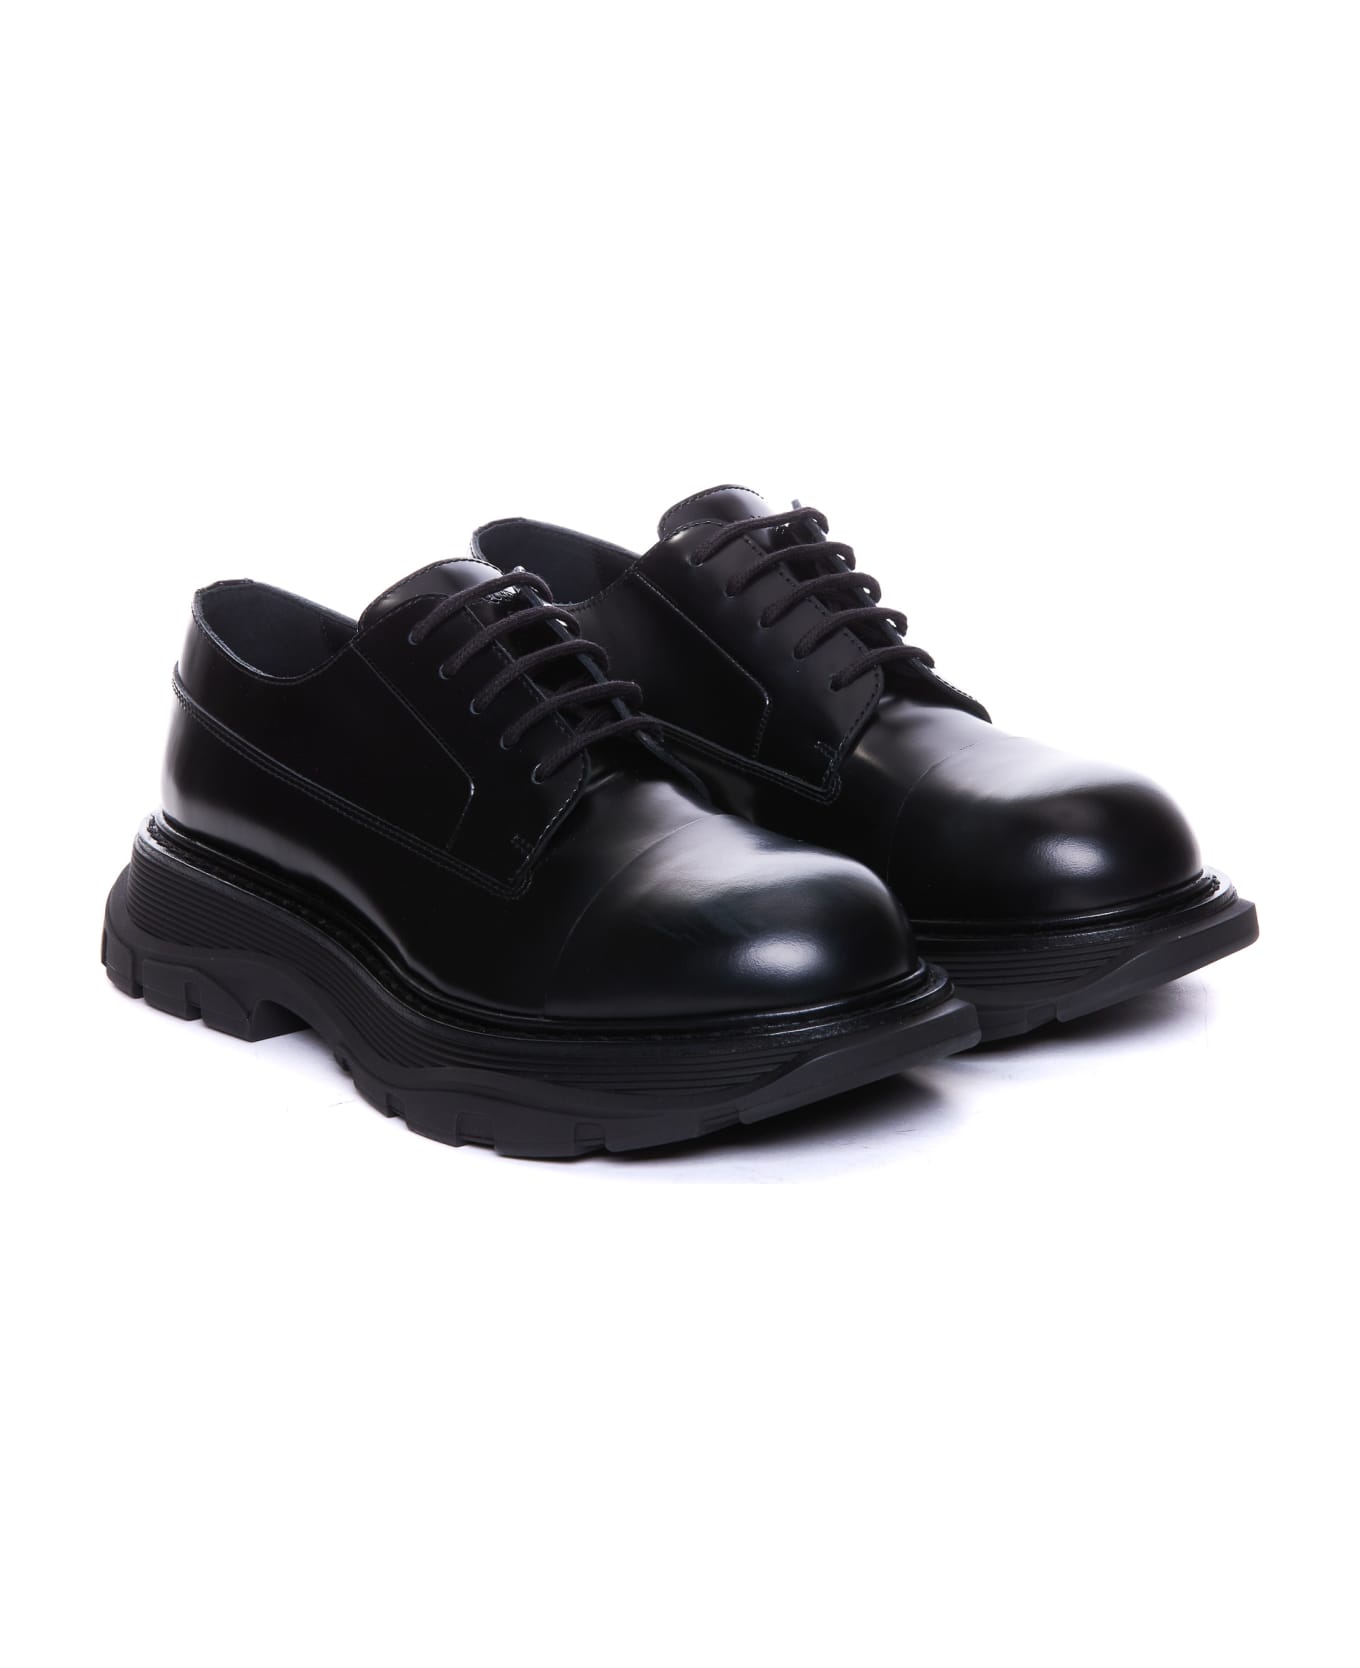 Alexander McQueen Tread Laced Up Shoes - Black